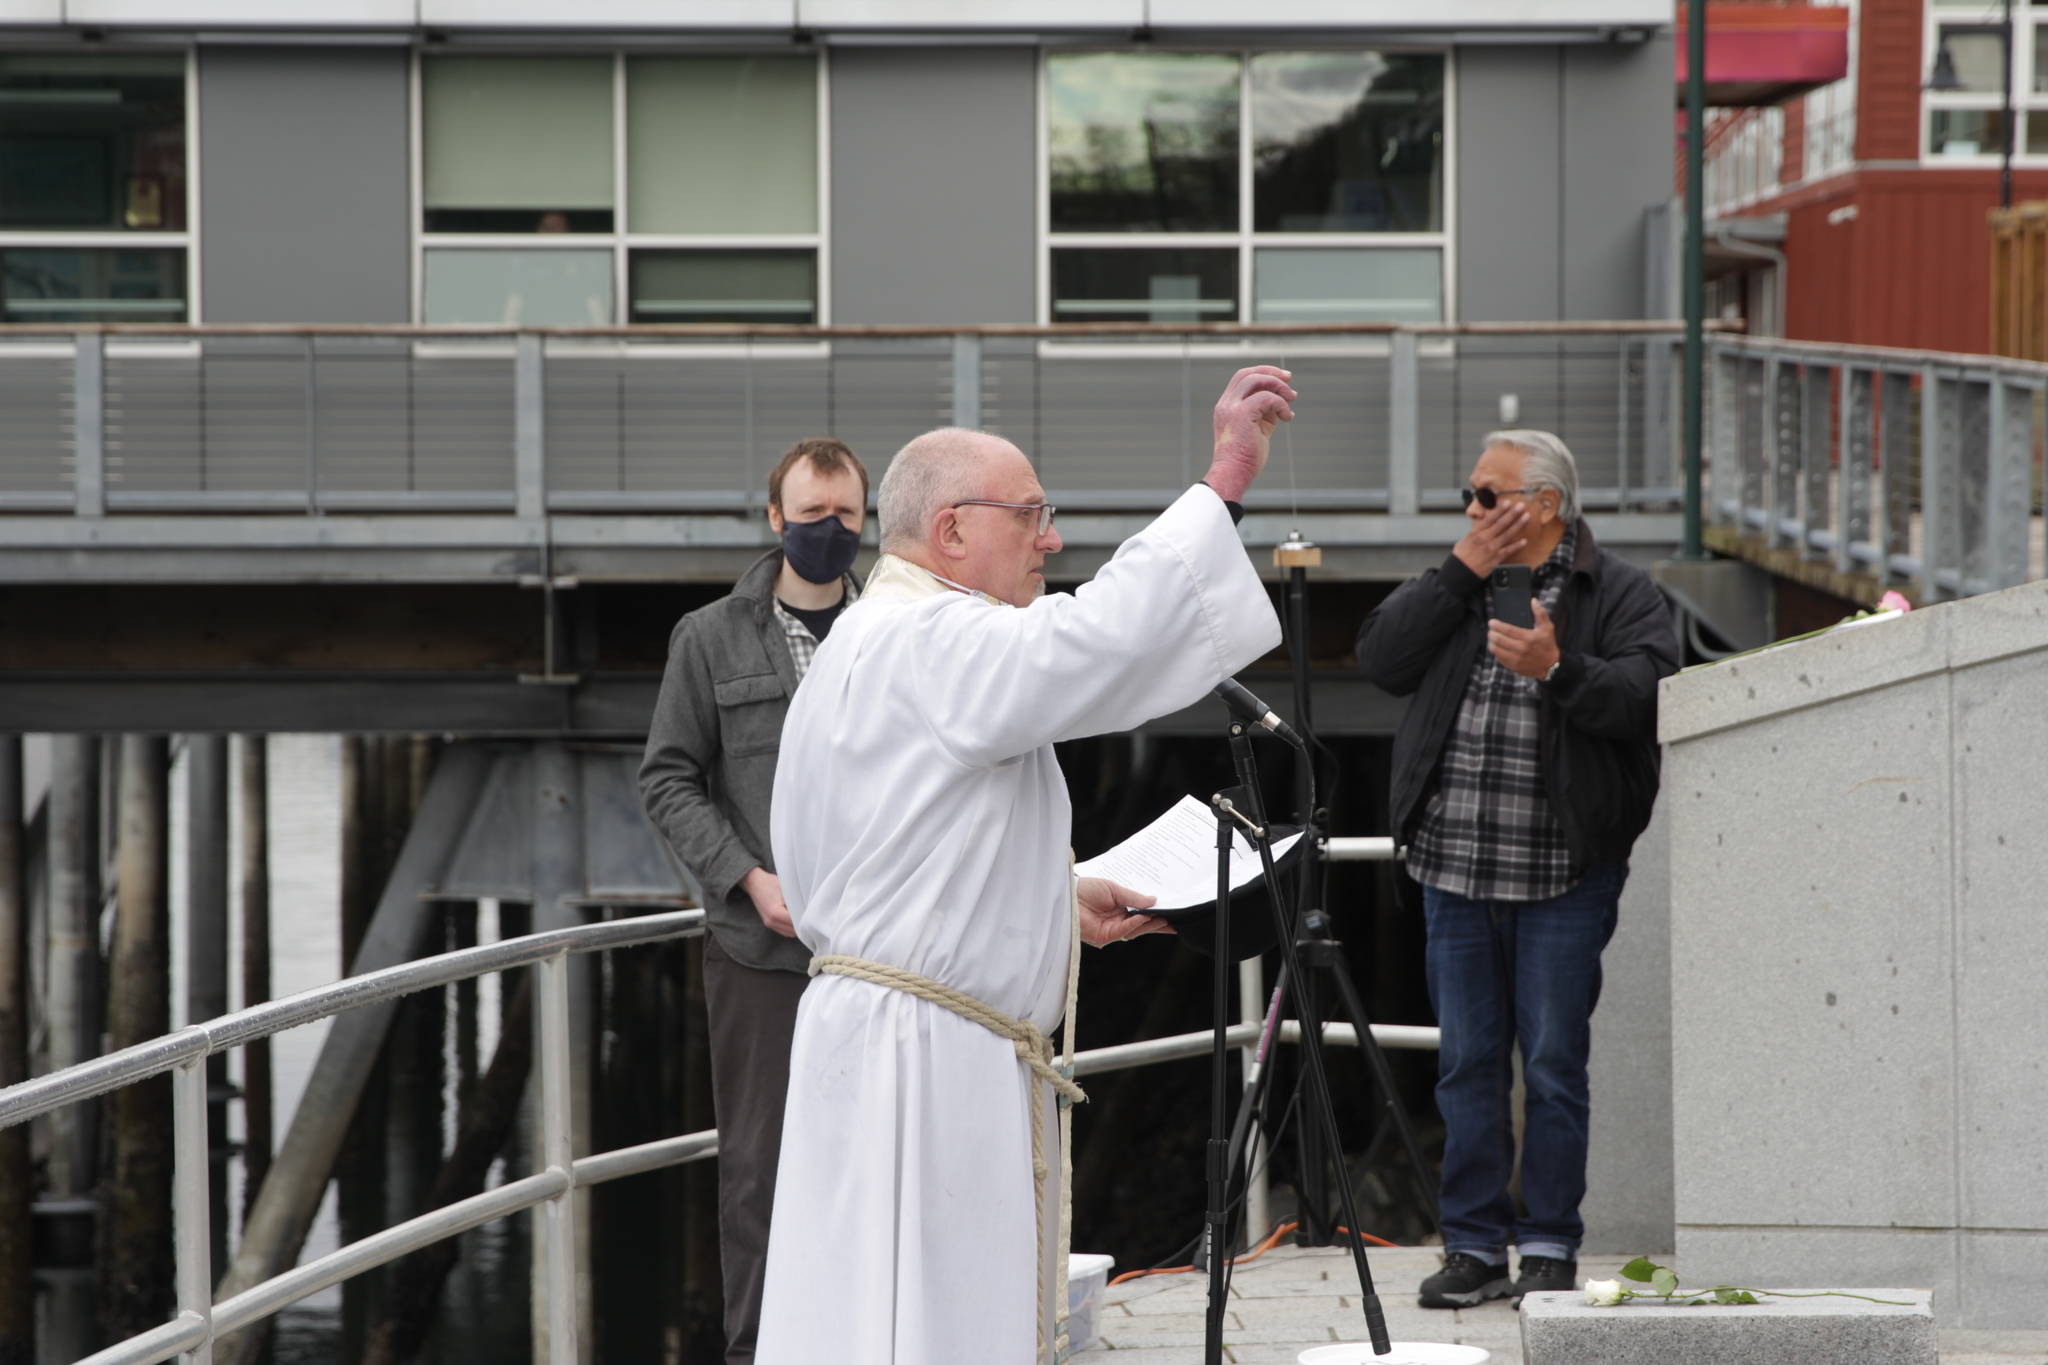 Fr. Gordon Blue takes part in the 31st annual Blessing of the Fleet and Reading of Names at the Alaska Commercial Fishermen’s Memorial in Juneau on May 1, 2021. (Michael S. Lockett / Juneau Empire)